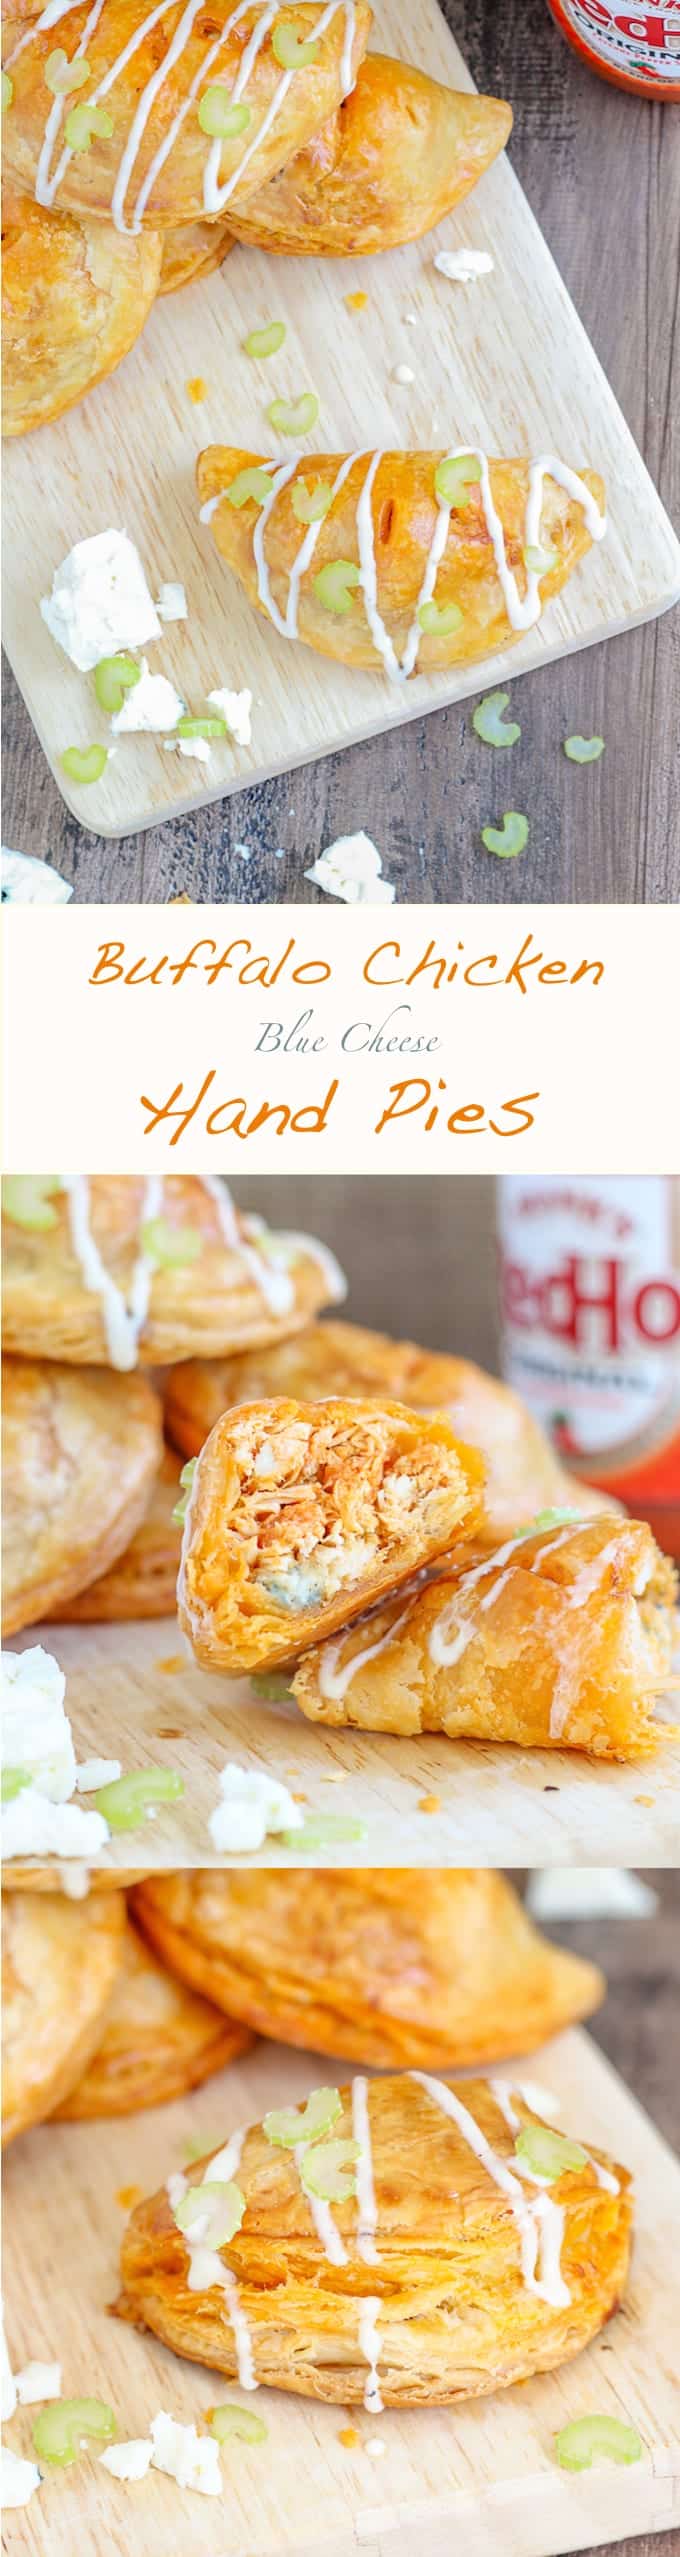 The Buffalo Chicken Blue Cheese Hand Pies will be a HUGE hit at your next party! All the flavors of Buffalo Chicken Wings in a flakey, all-butter pastry! 